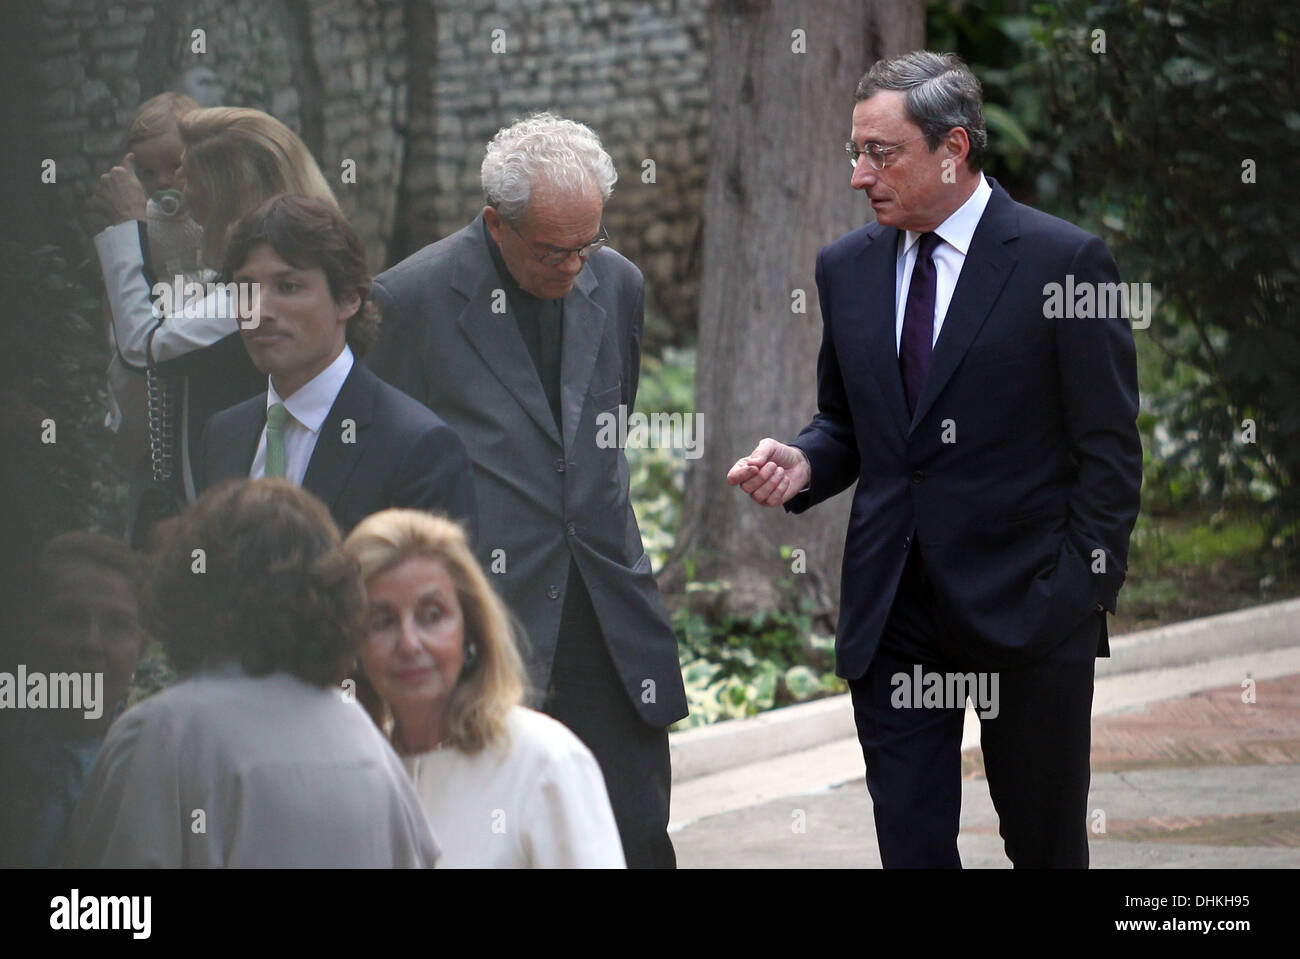 Roma Mario Draghi, President of the European Central Bank from 1 November 2011, with his family, his wife Serena Hat (white coat) and his son James, participating in the naming ceremony of his nephew in the church of St. Agnes in Rome.  Mario Draghi speaks before the ceremony with a priest and confess it seems.  Stock Photo